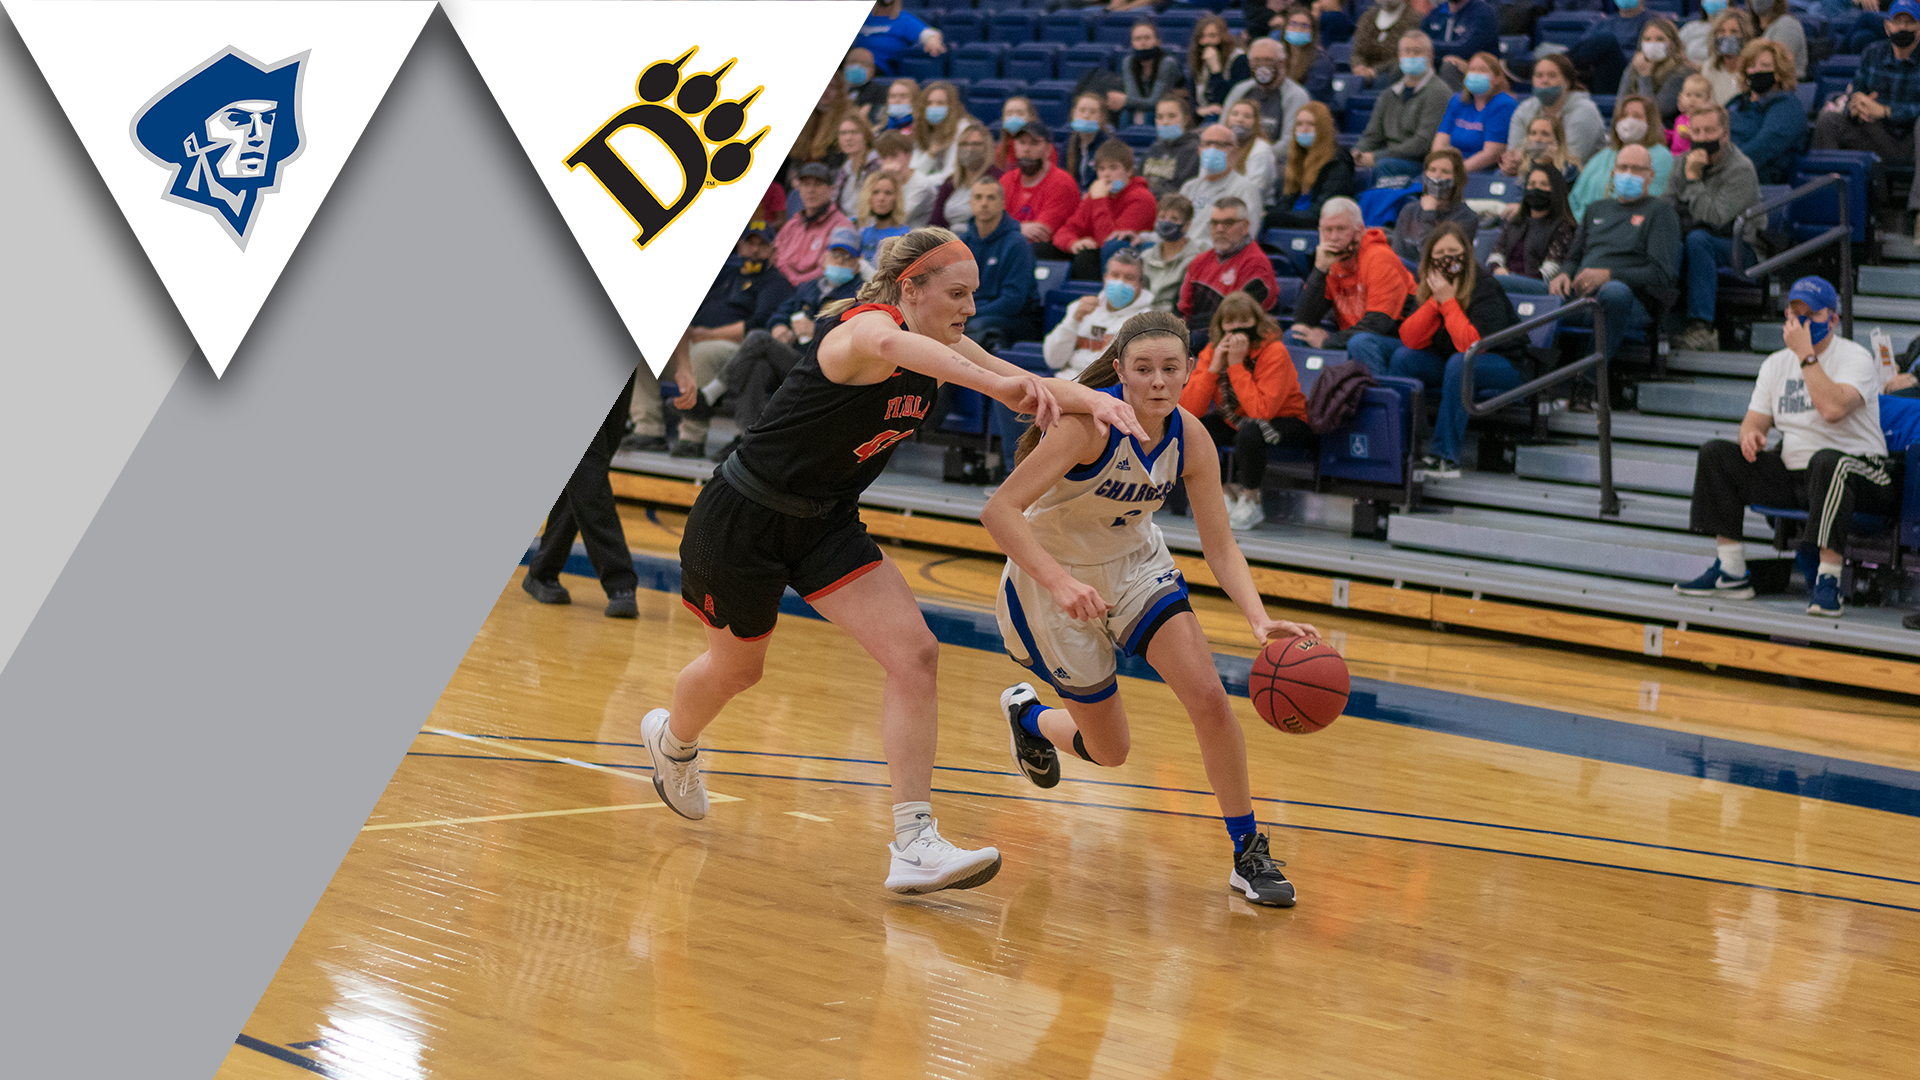 Weekend Preview: Charger women make road trip to Ohio for conference clashes